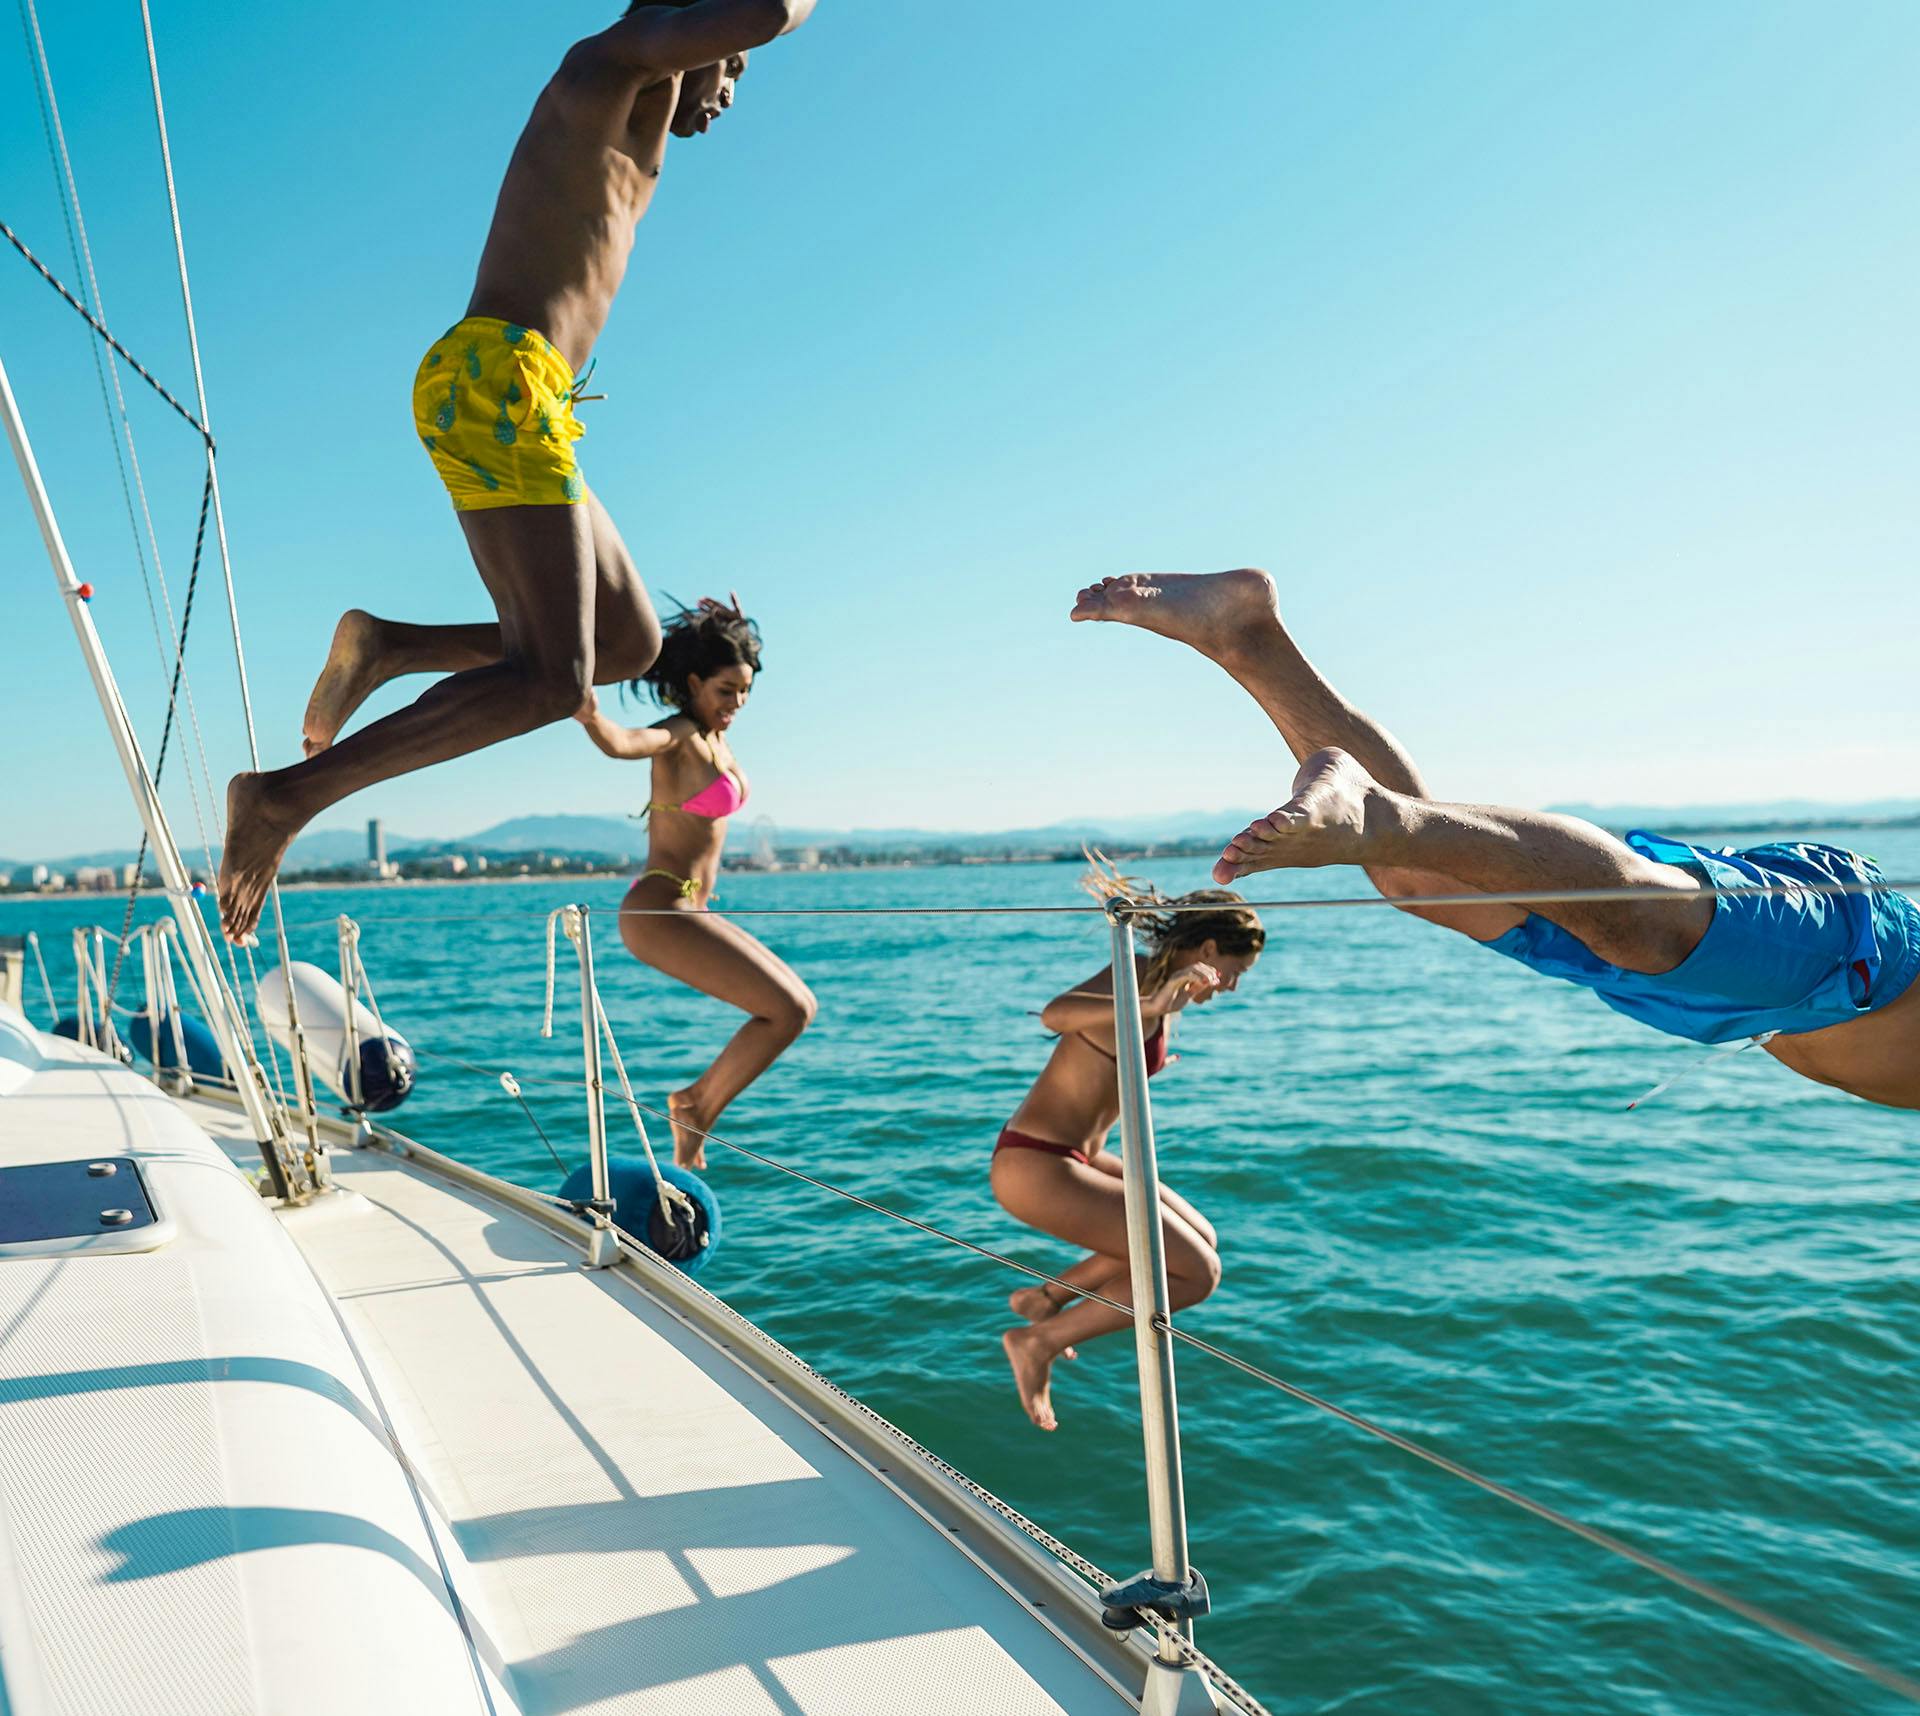 People happily jumping off a boat